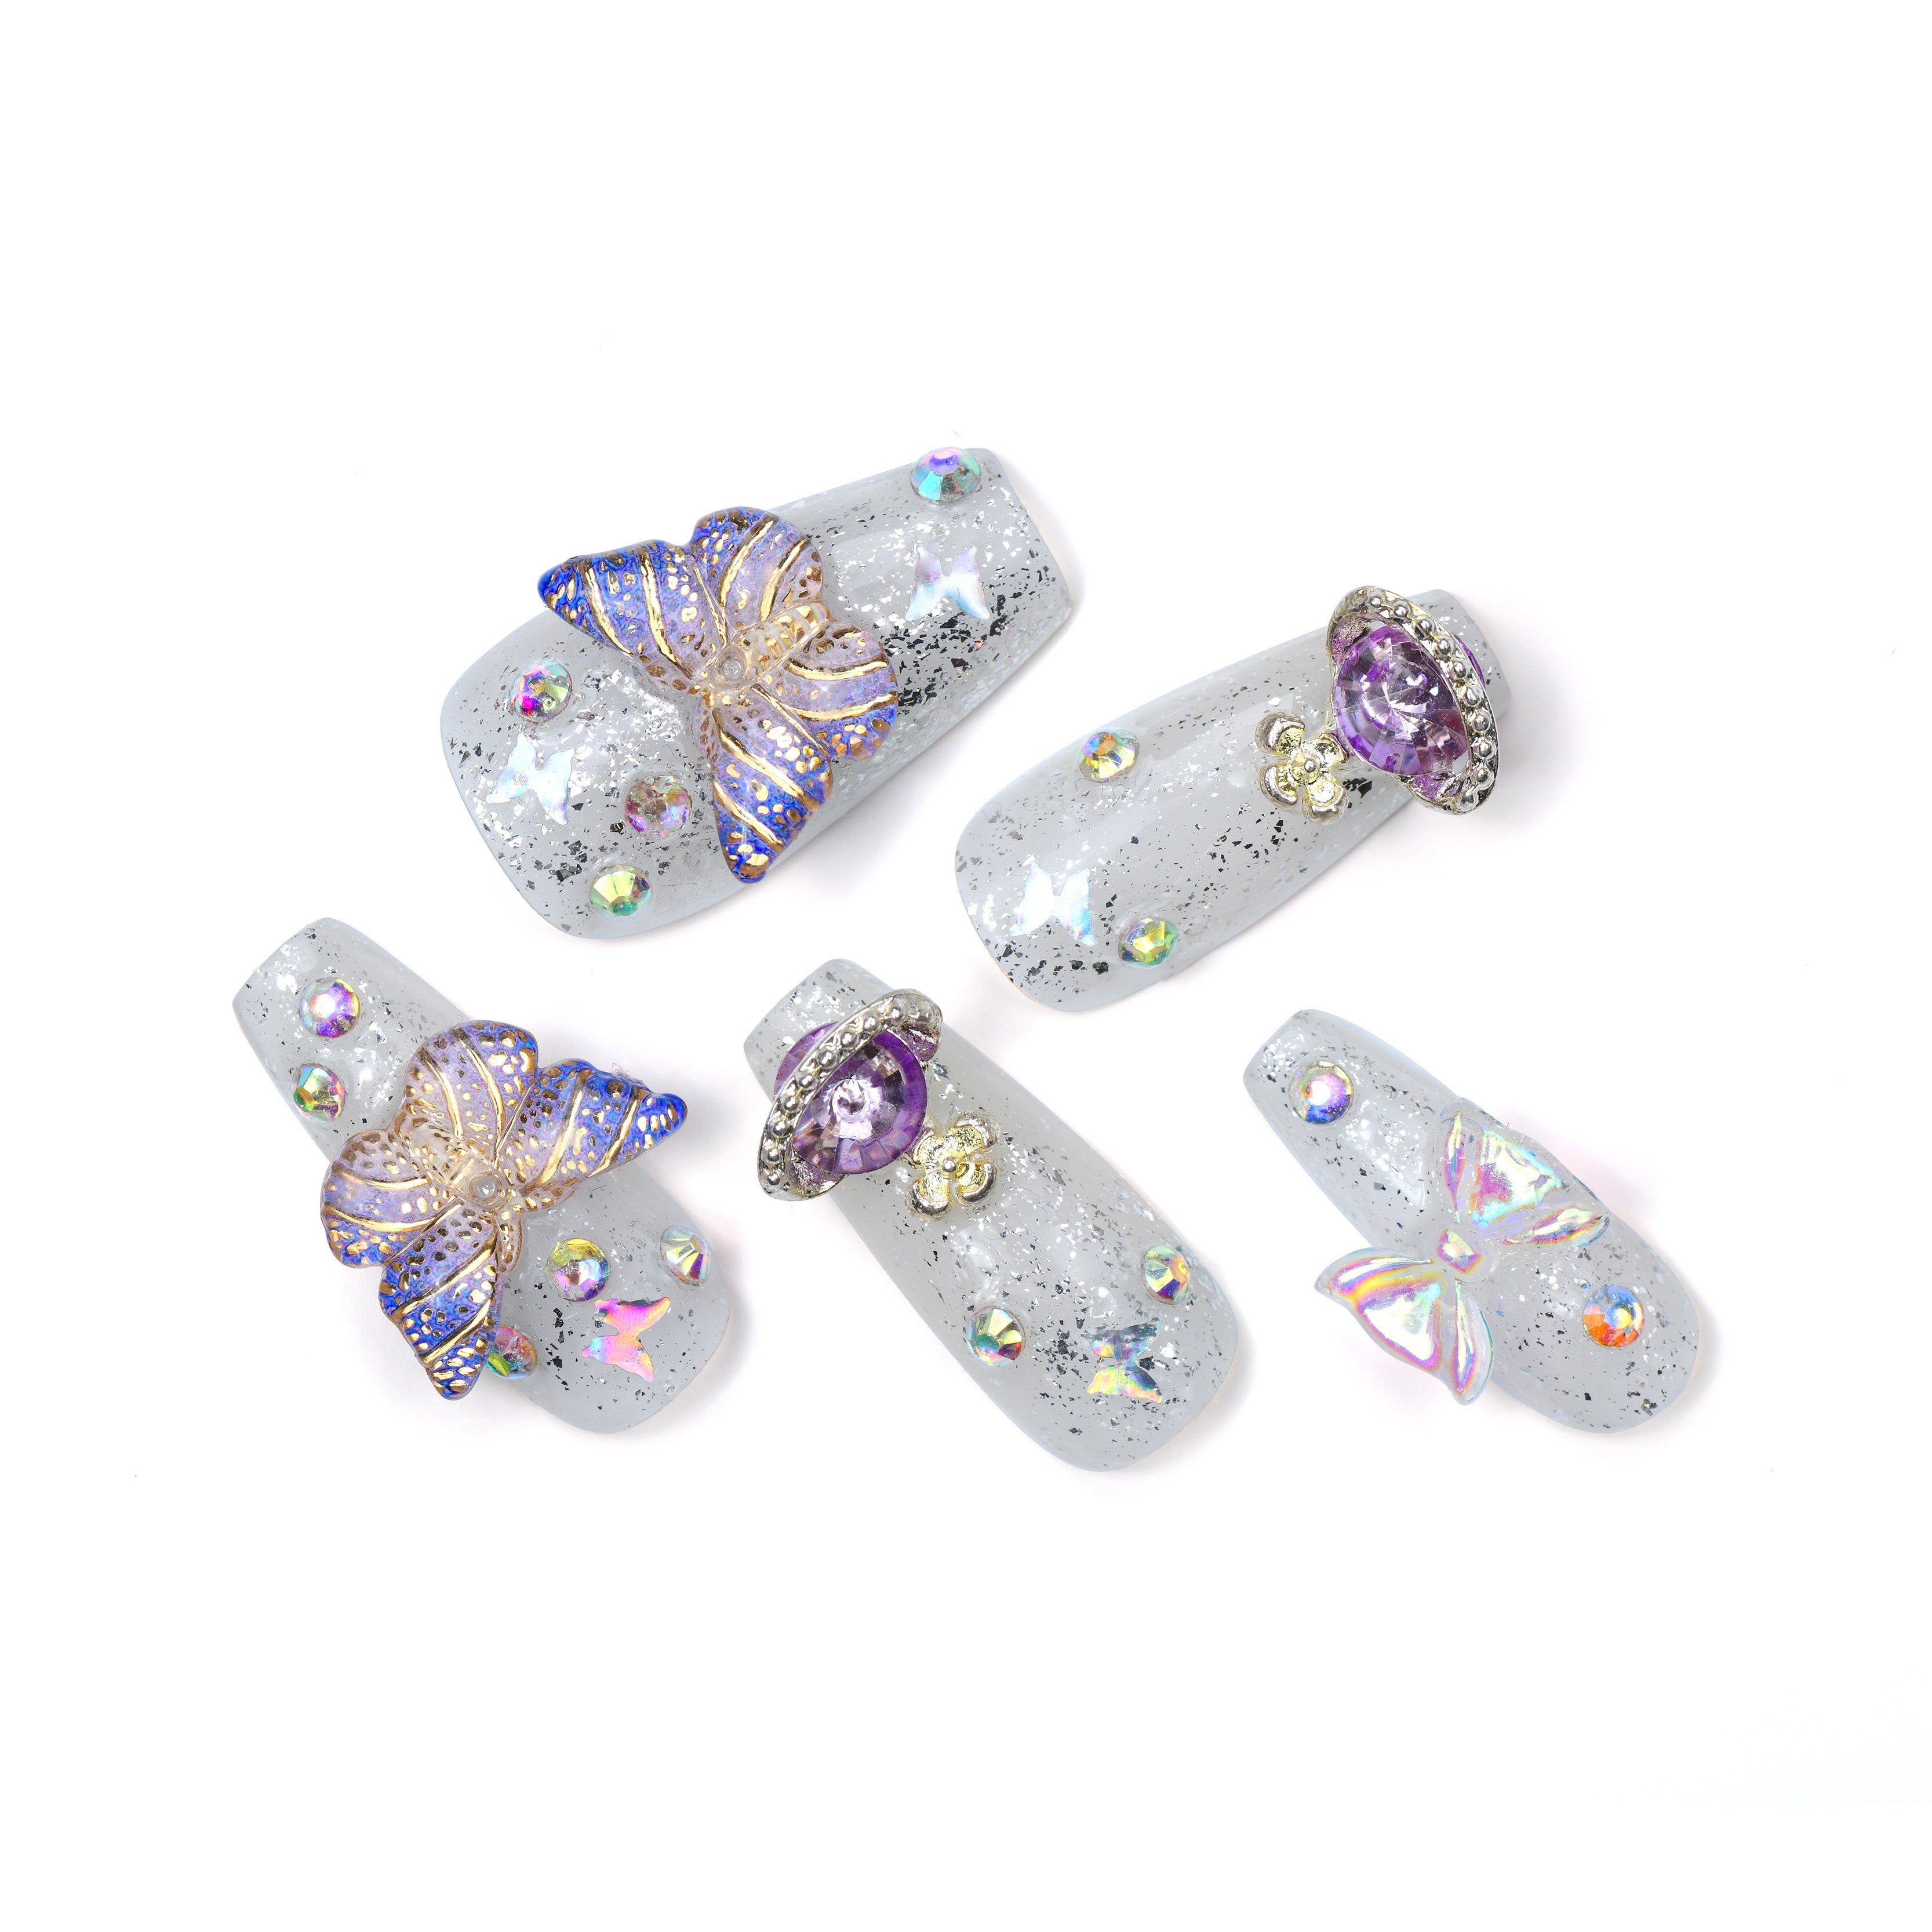 Bling Glossy White Acrylic Coffin Medium Butterfly Press On Nails With Diamonds-BEYONDCANVA